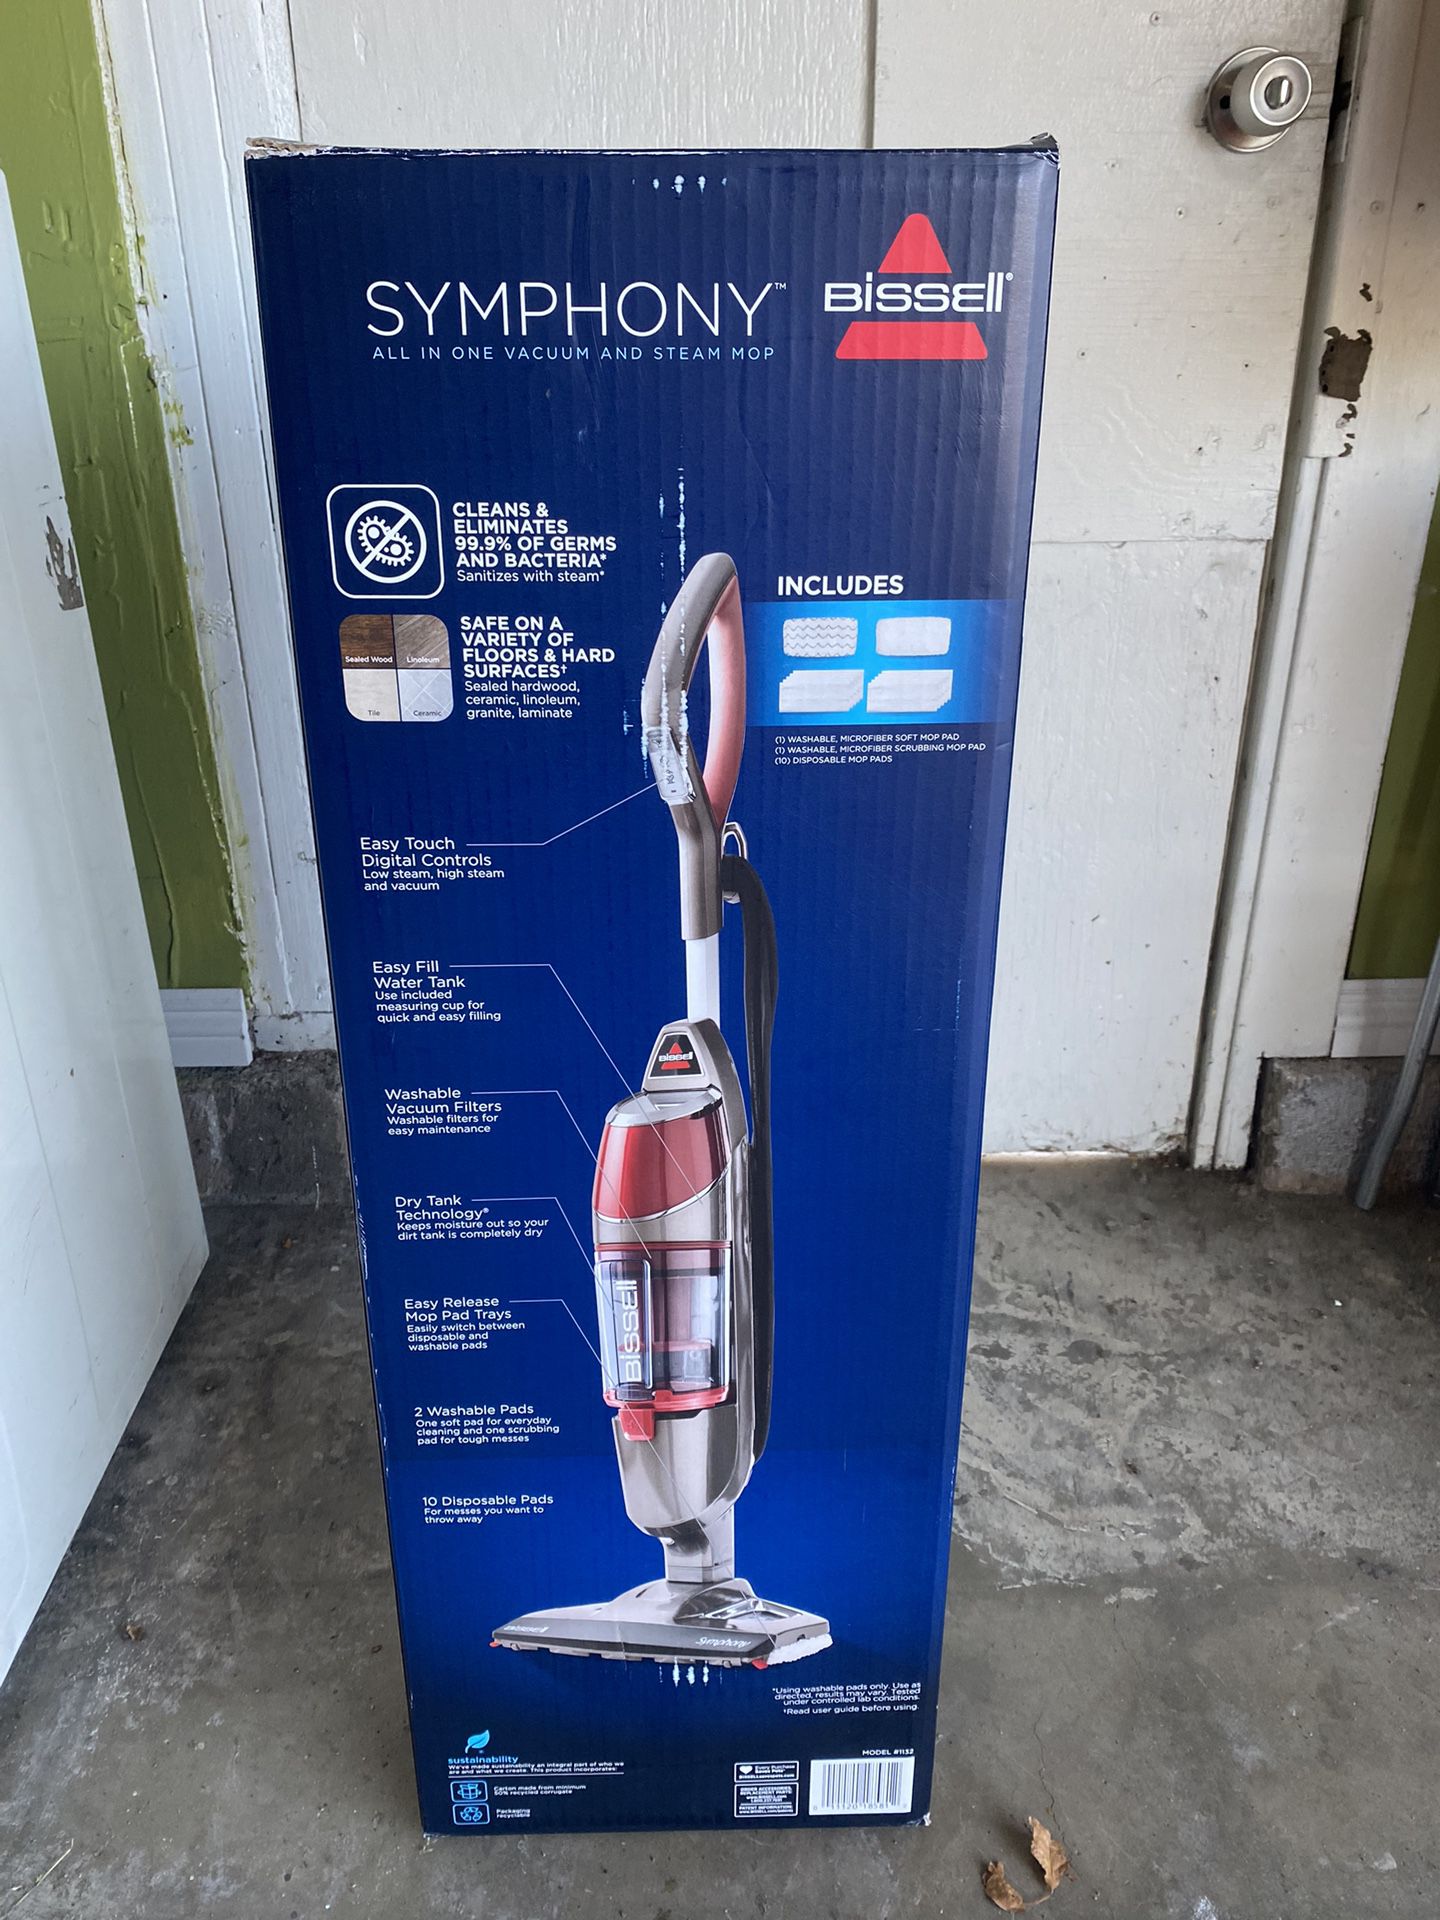 all in one Vacuum & Steam Mop